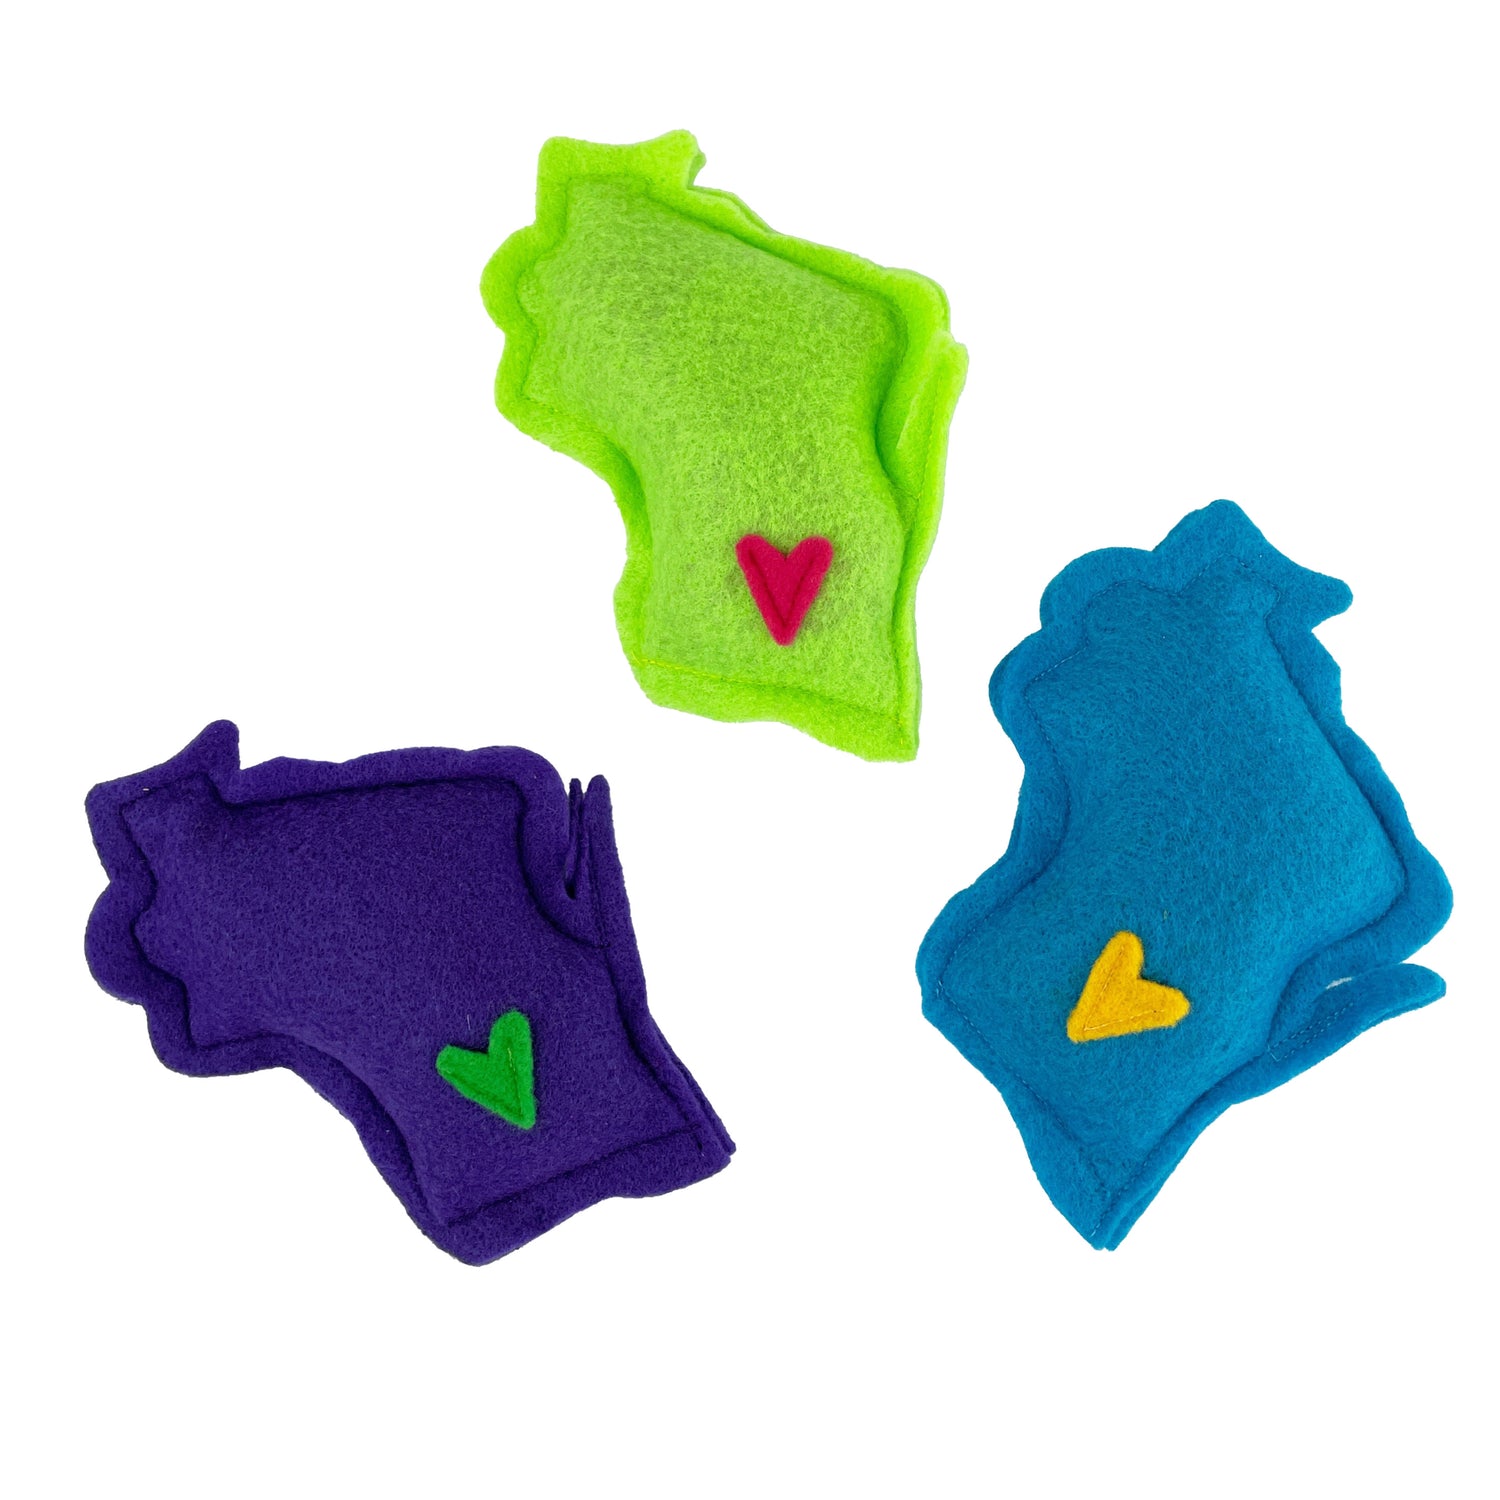 1 green, 1 purple, and 1 blue cat toy shaped like the state of Wisconsin with a heart over the Madison area